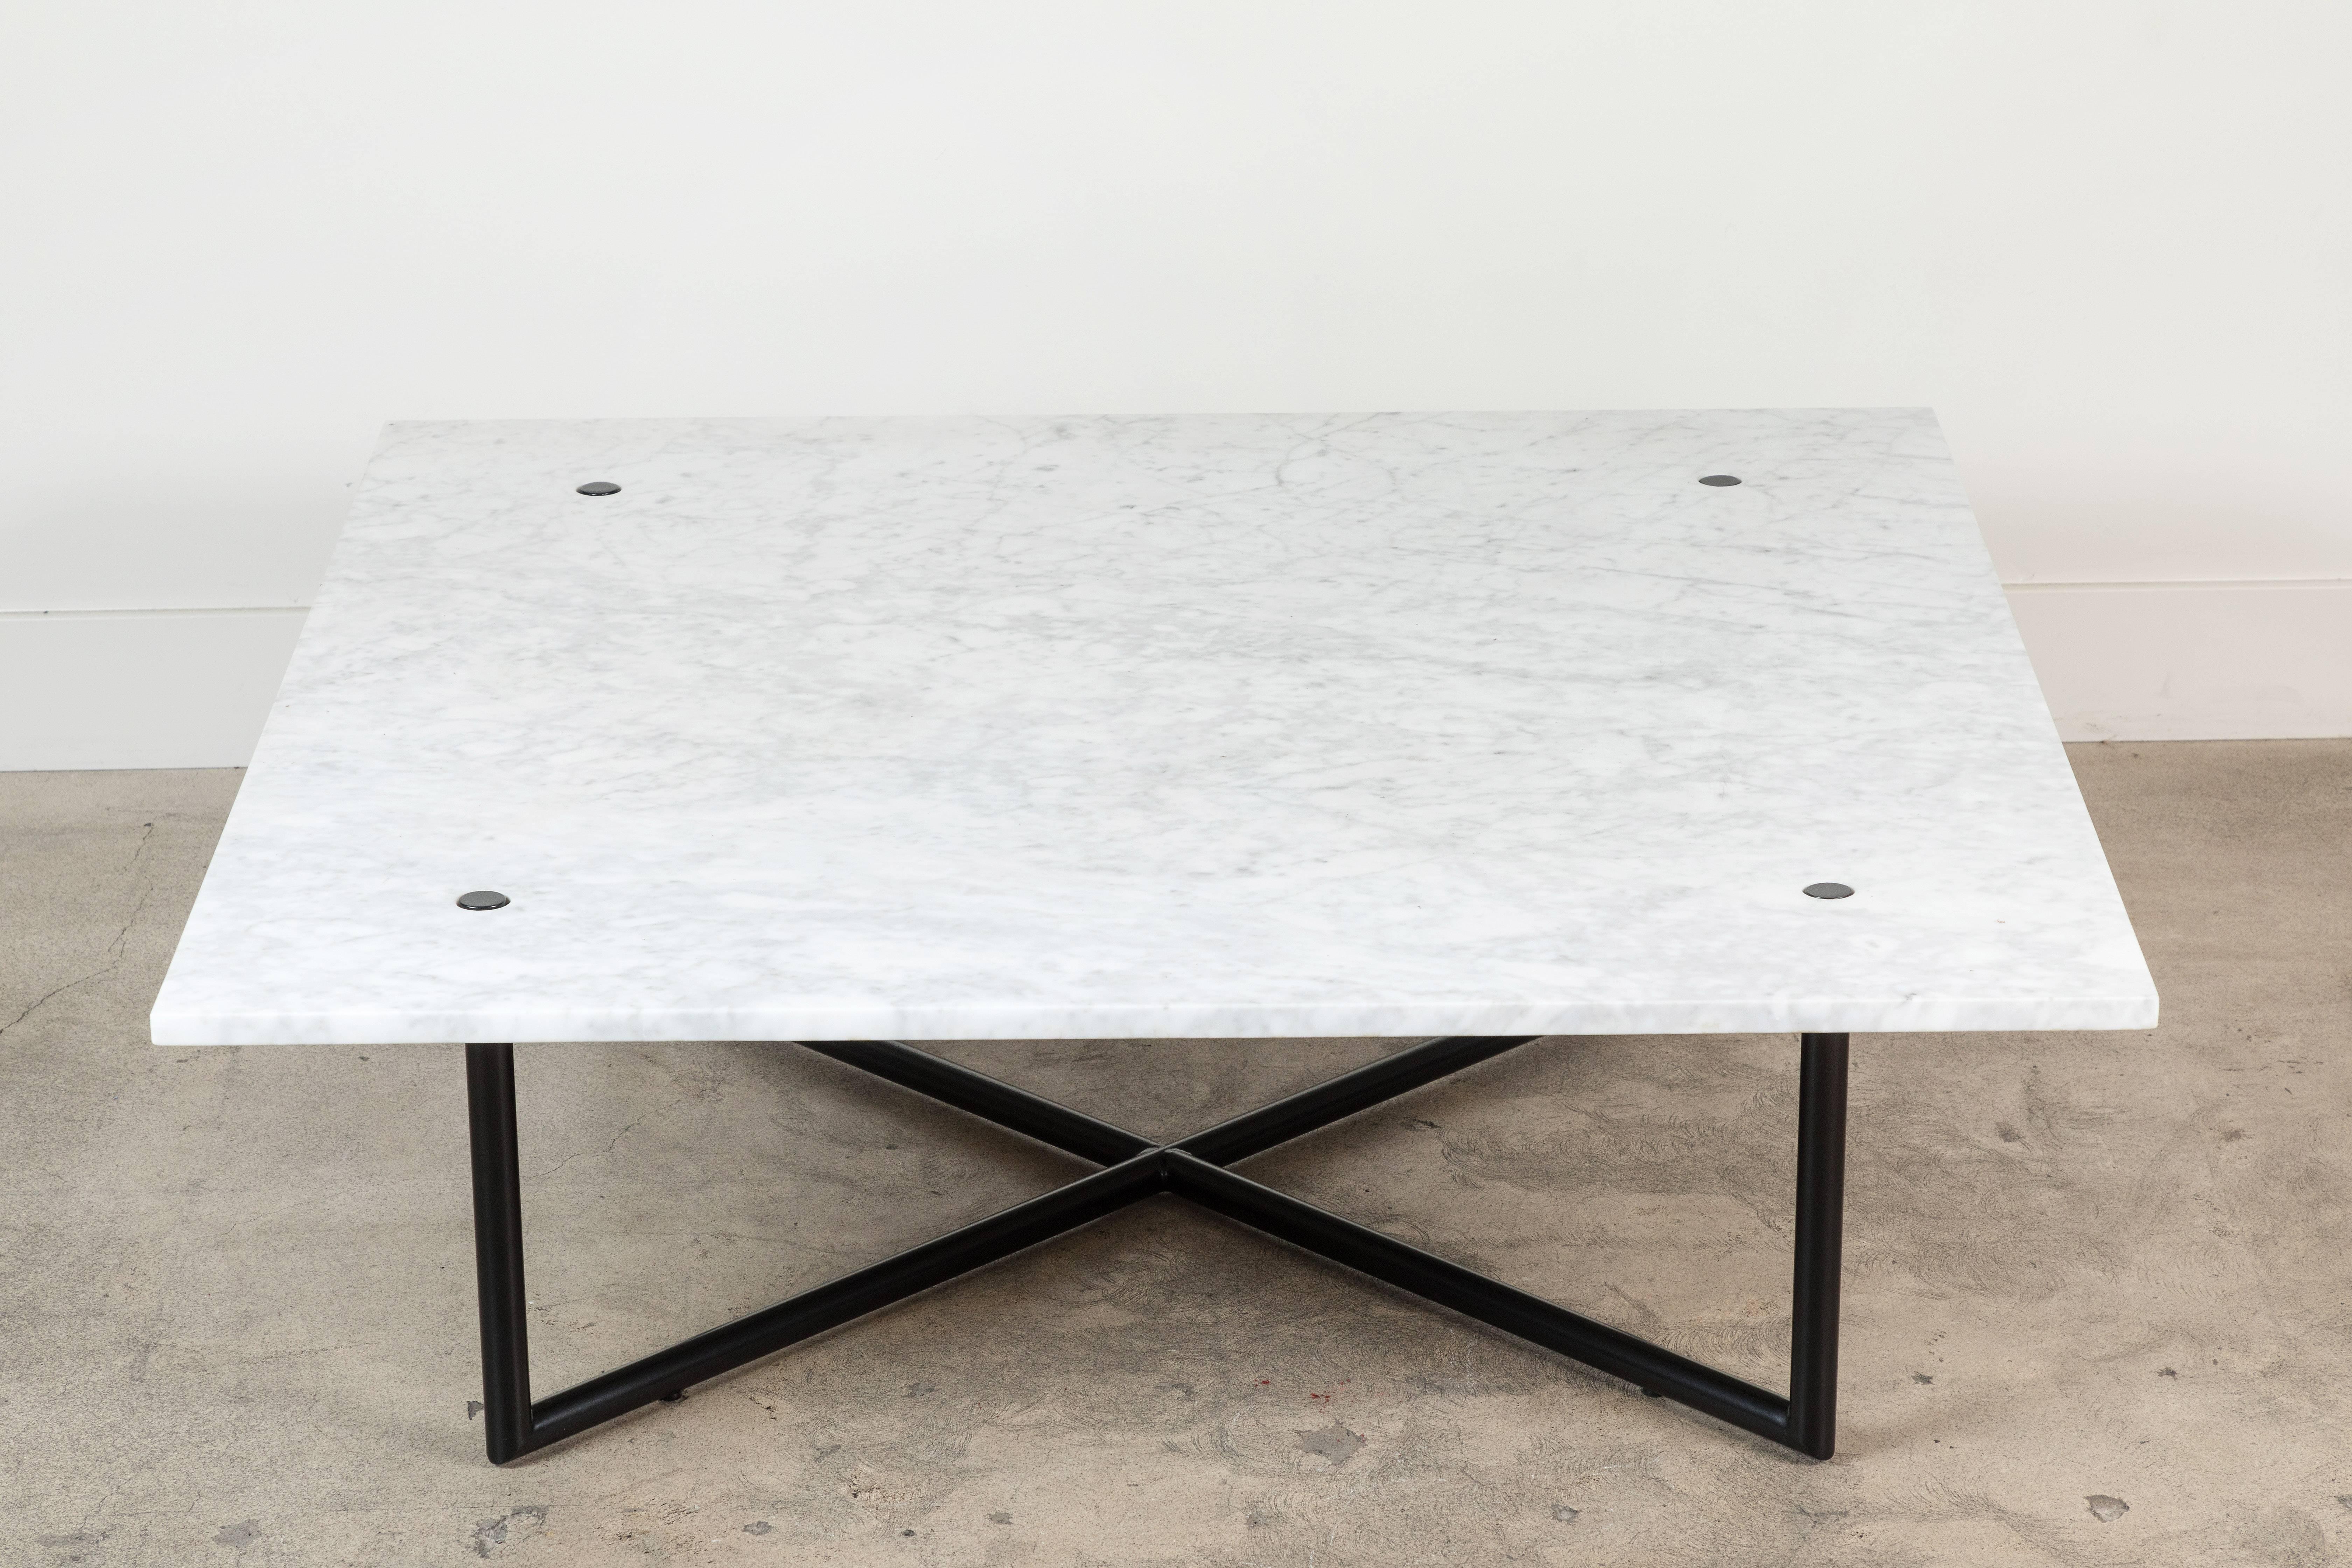 1.2.3. series coffee table by Ten10 in white Carrara marble.